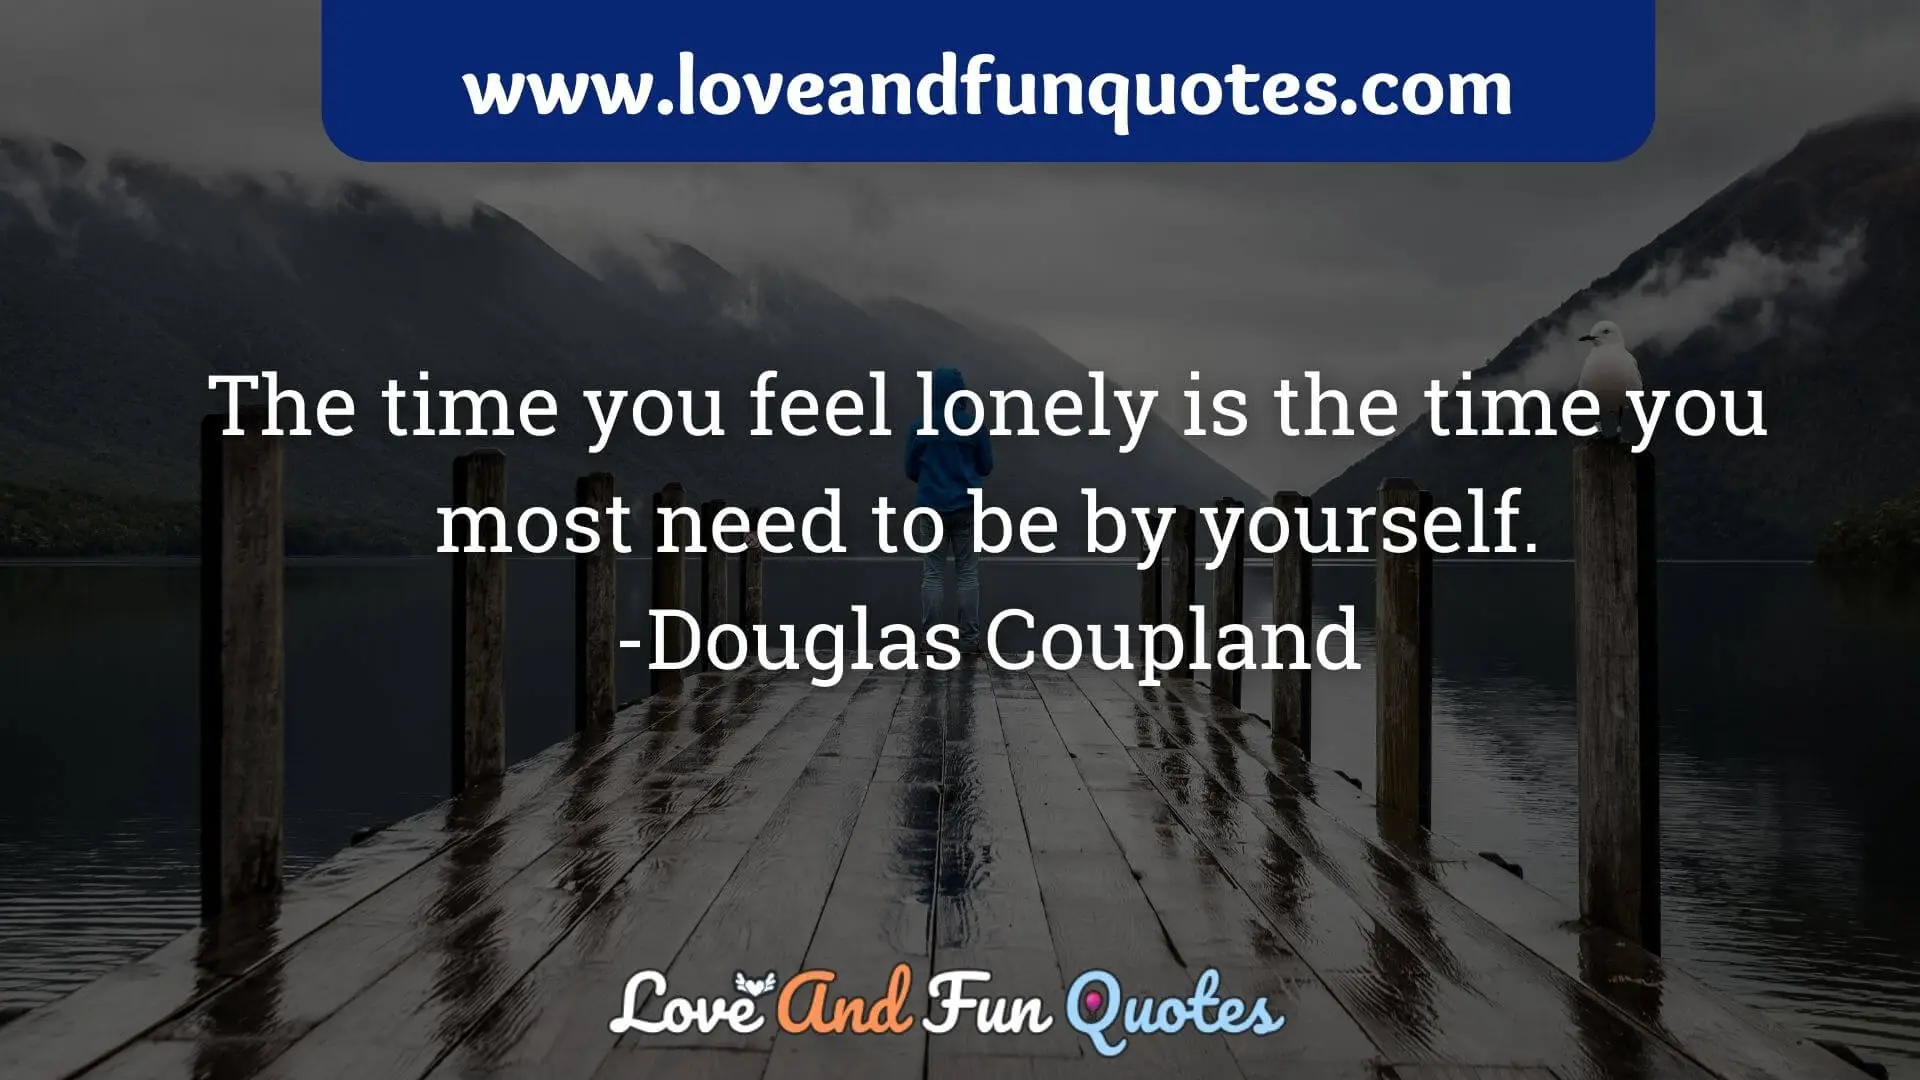 The time you feel lonely is the time you most need to be by yourself.